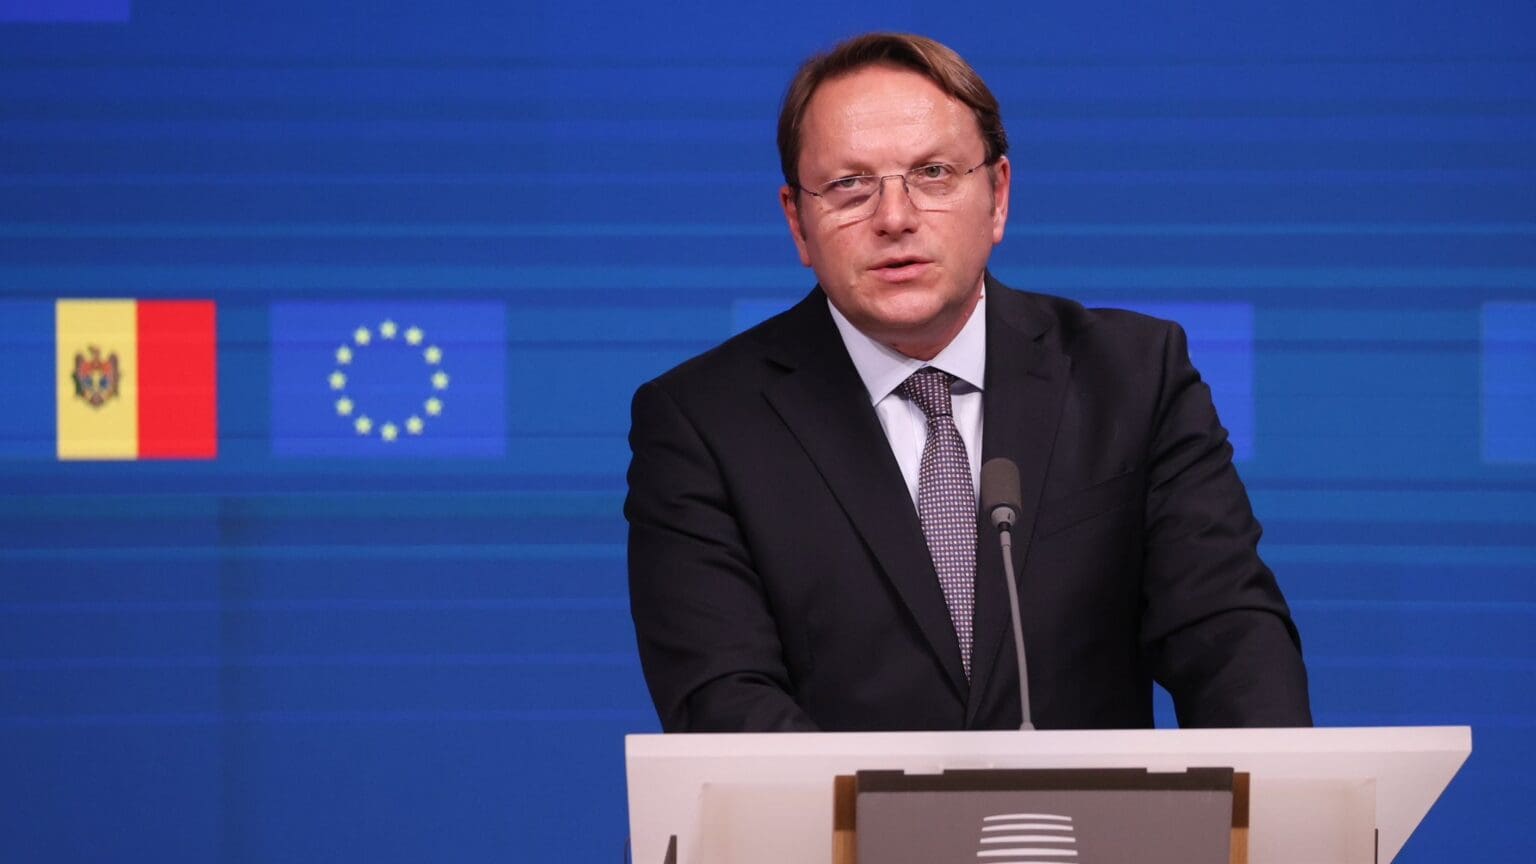 EU Leaders Plan to Punish Hungary over Resistance to Ukraine’s Accession